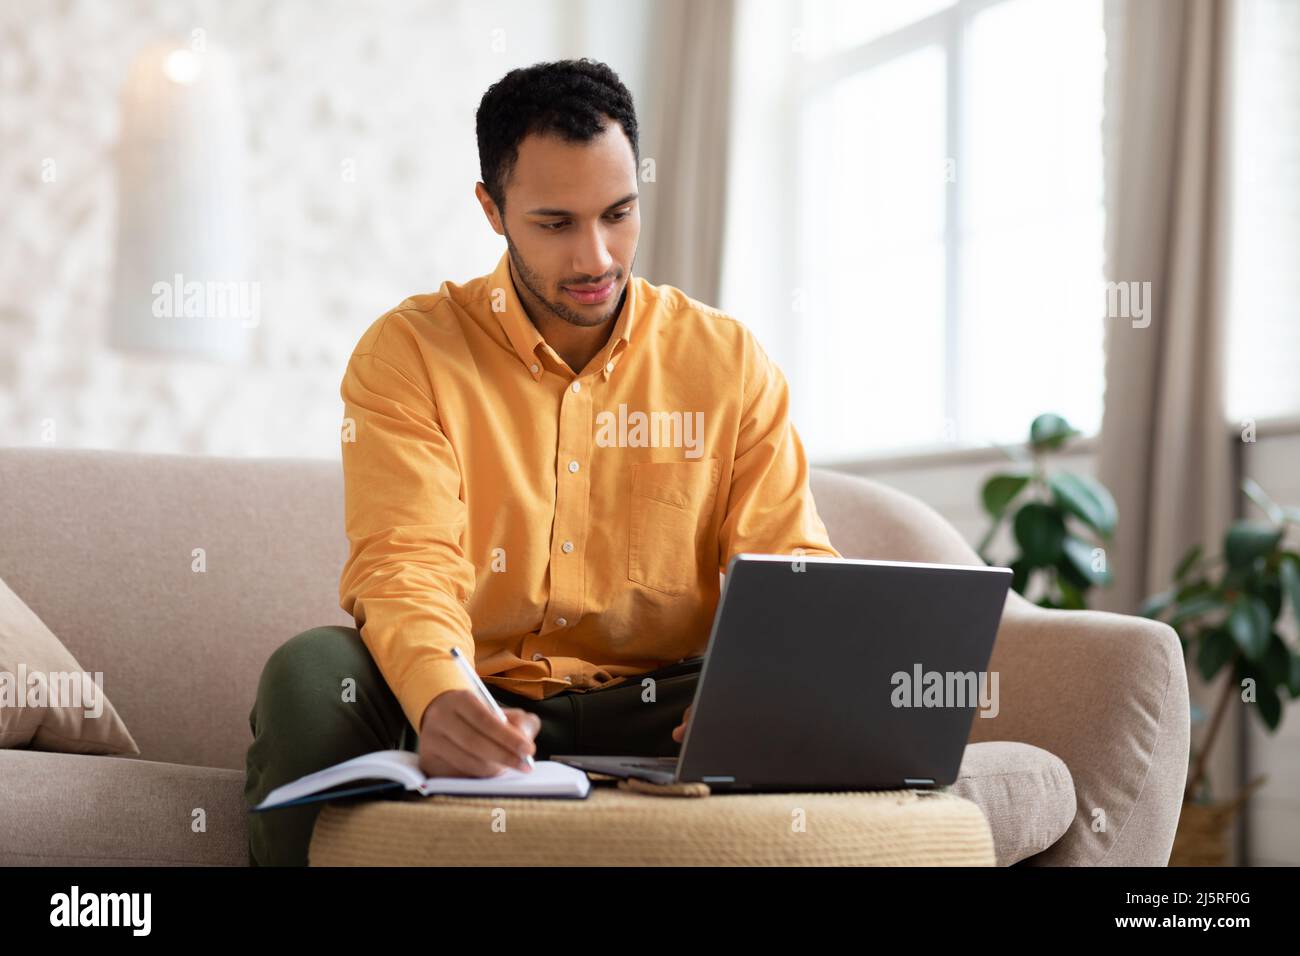 Portrait of focused Arab man using laptop and writing Stock Photo